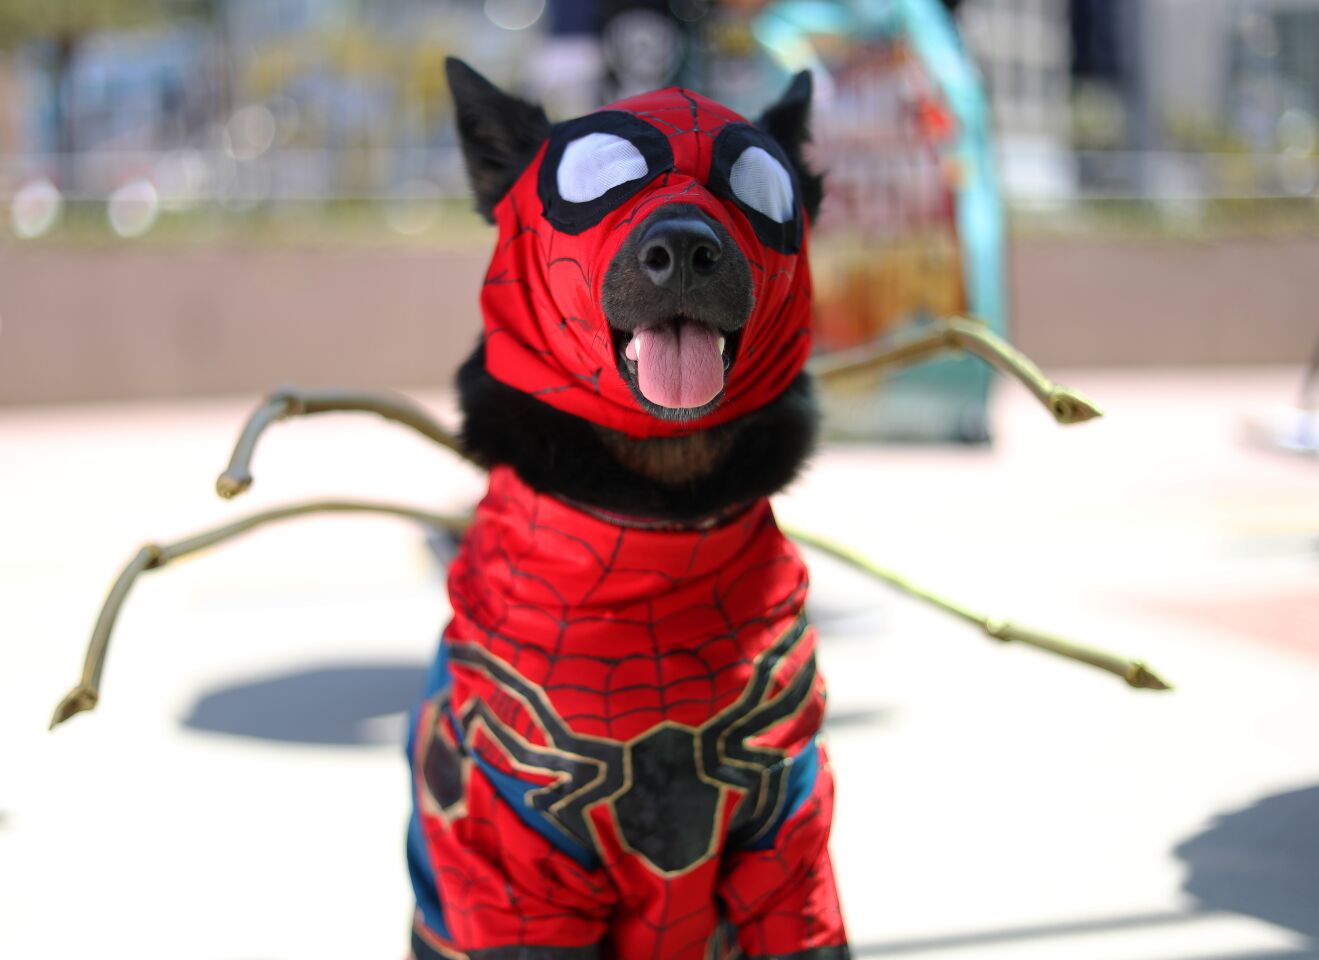 Merly, the cosplay dog, of Houston dressed as Iron Spider at Comic Con International in San Diego on July 18, 2019.